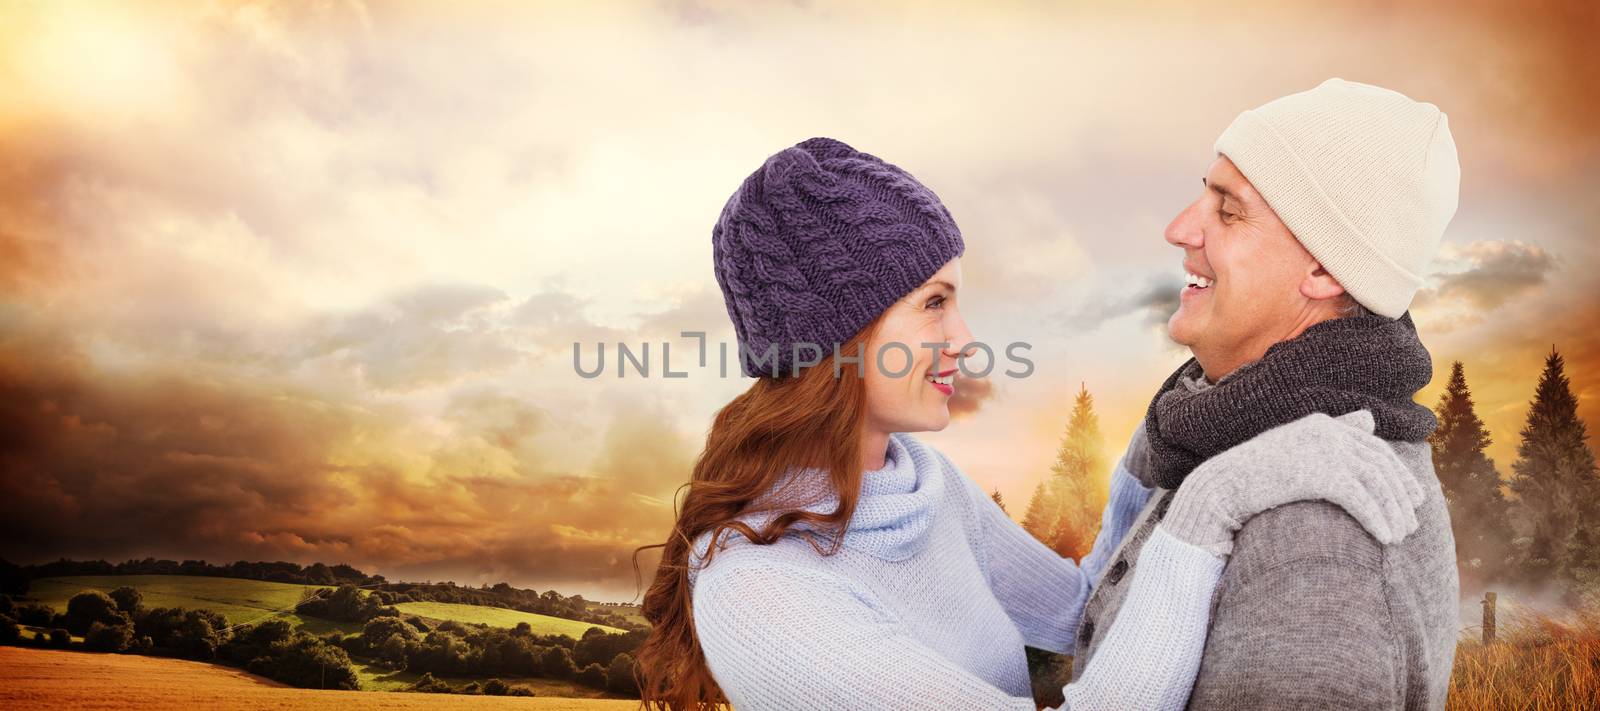 Happy couple in warm clothing against country scene